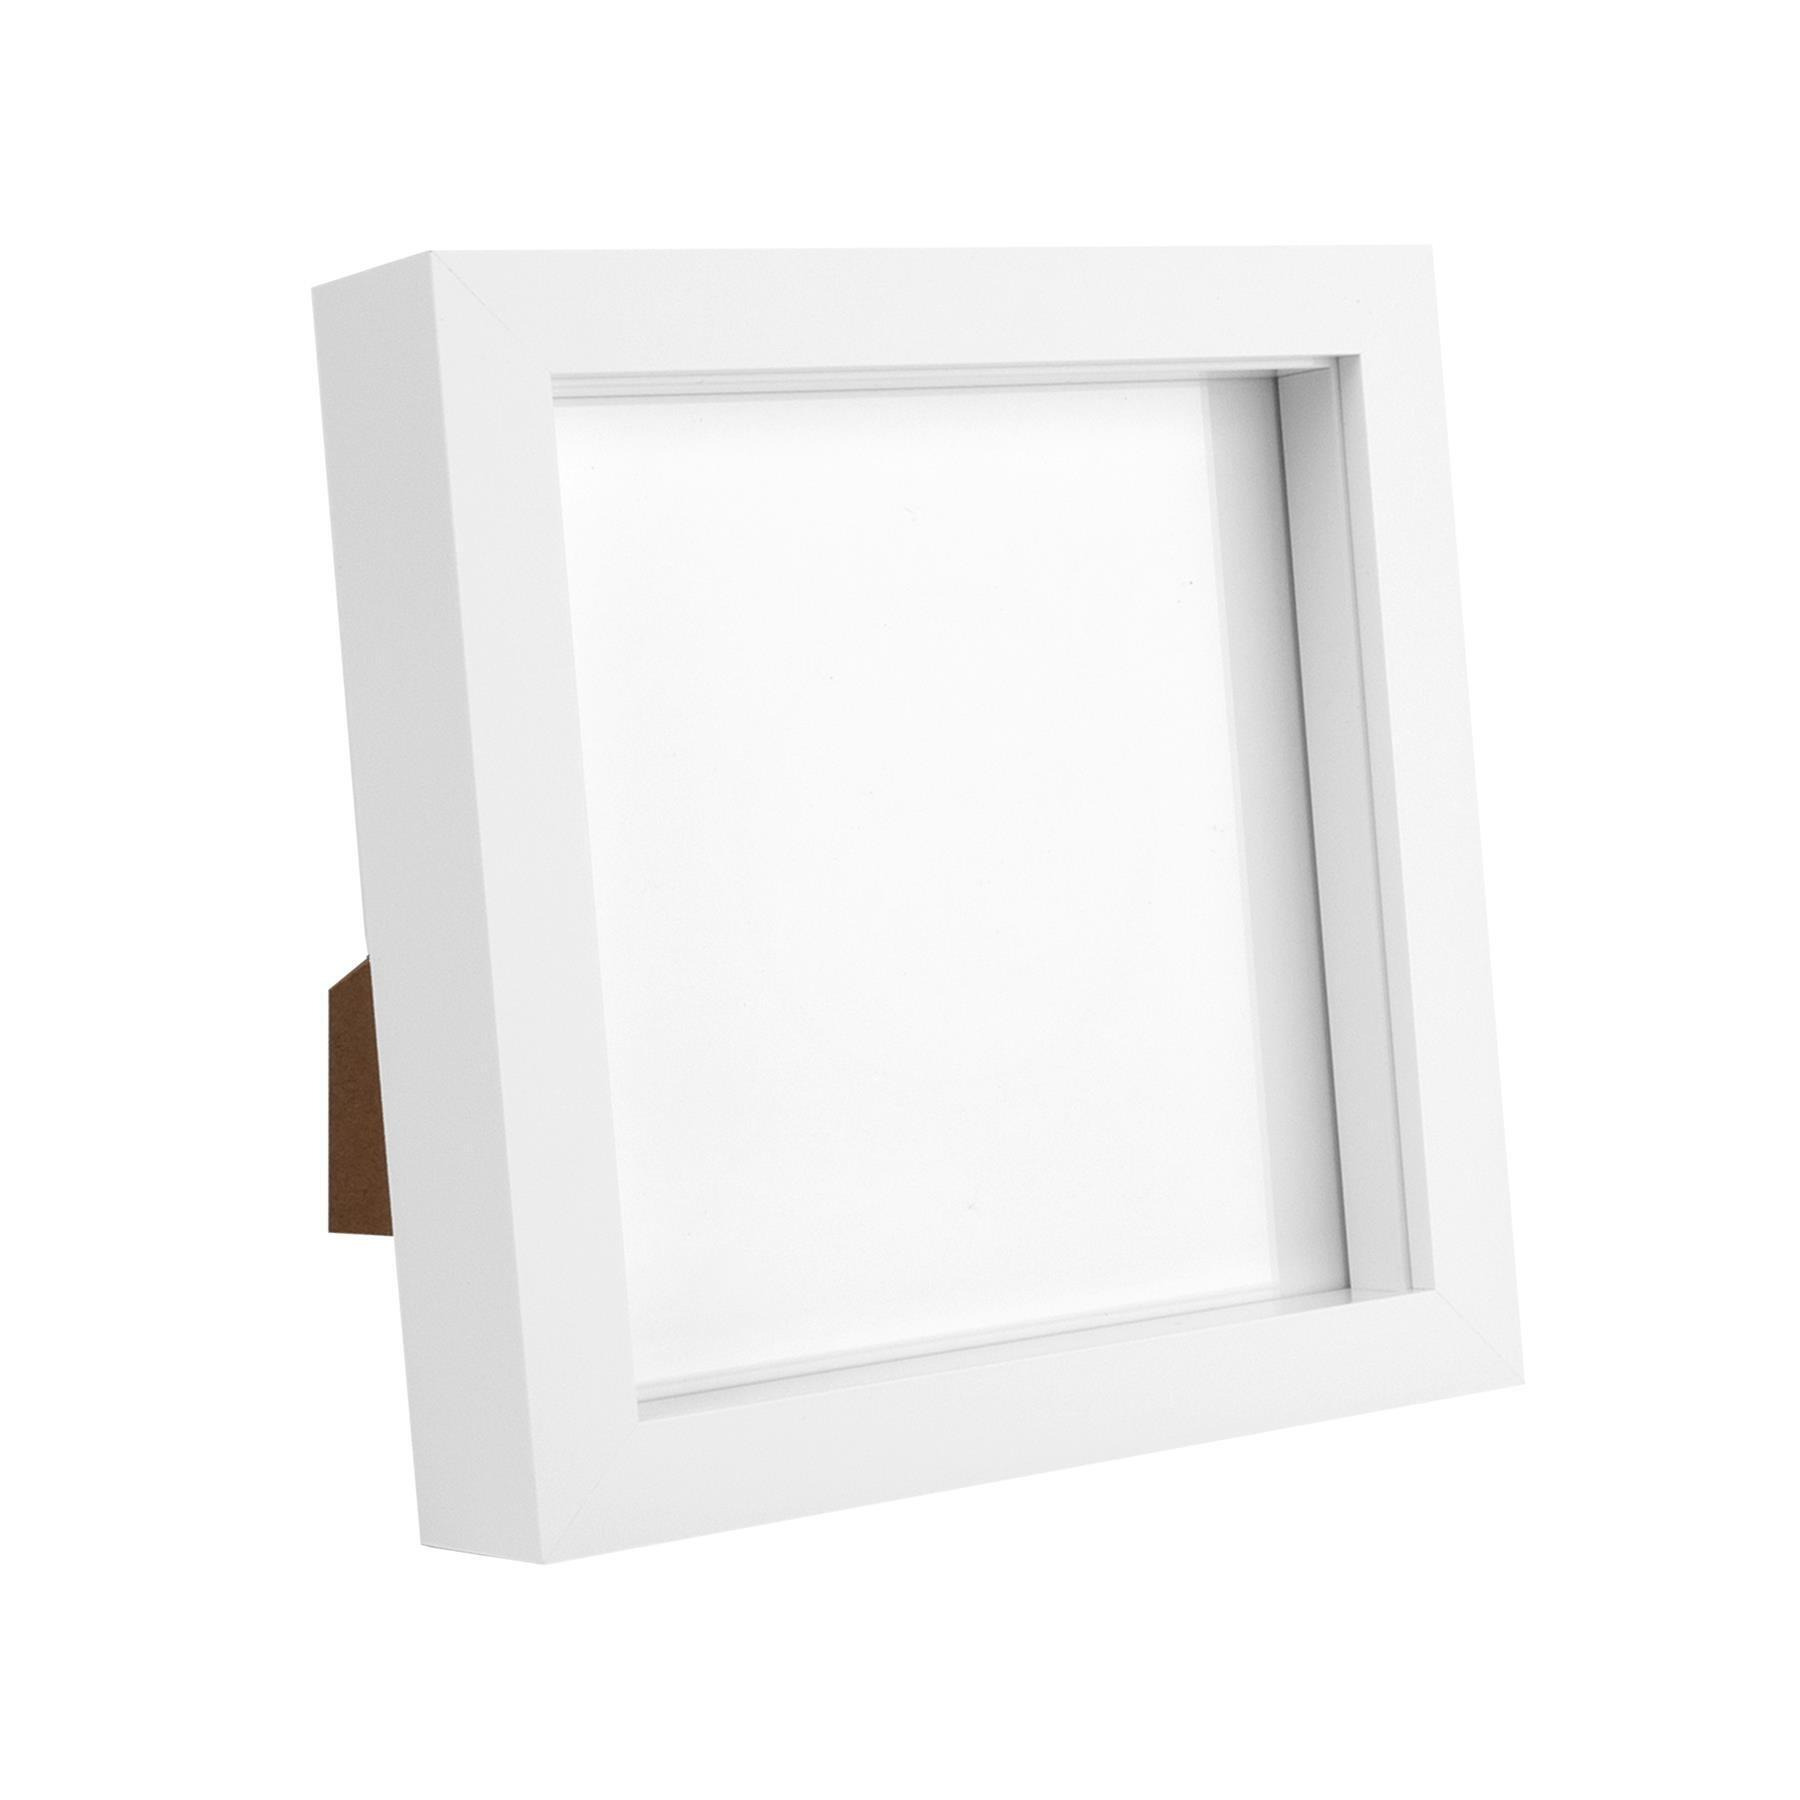 "6x6"" 3D Box Photo Frame with Spacer" - image 1